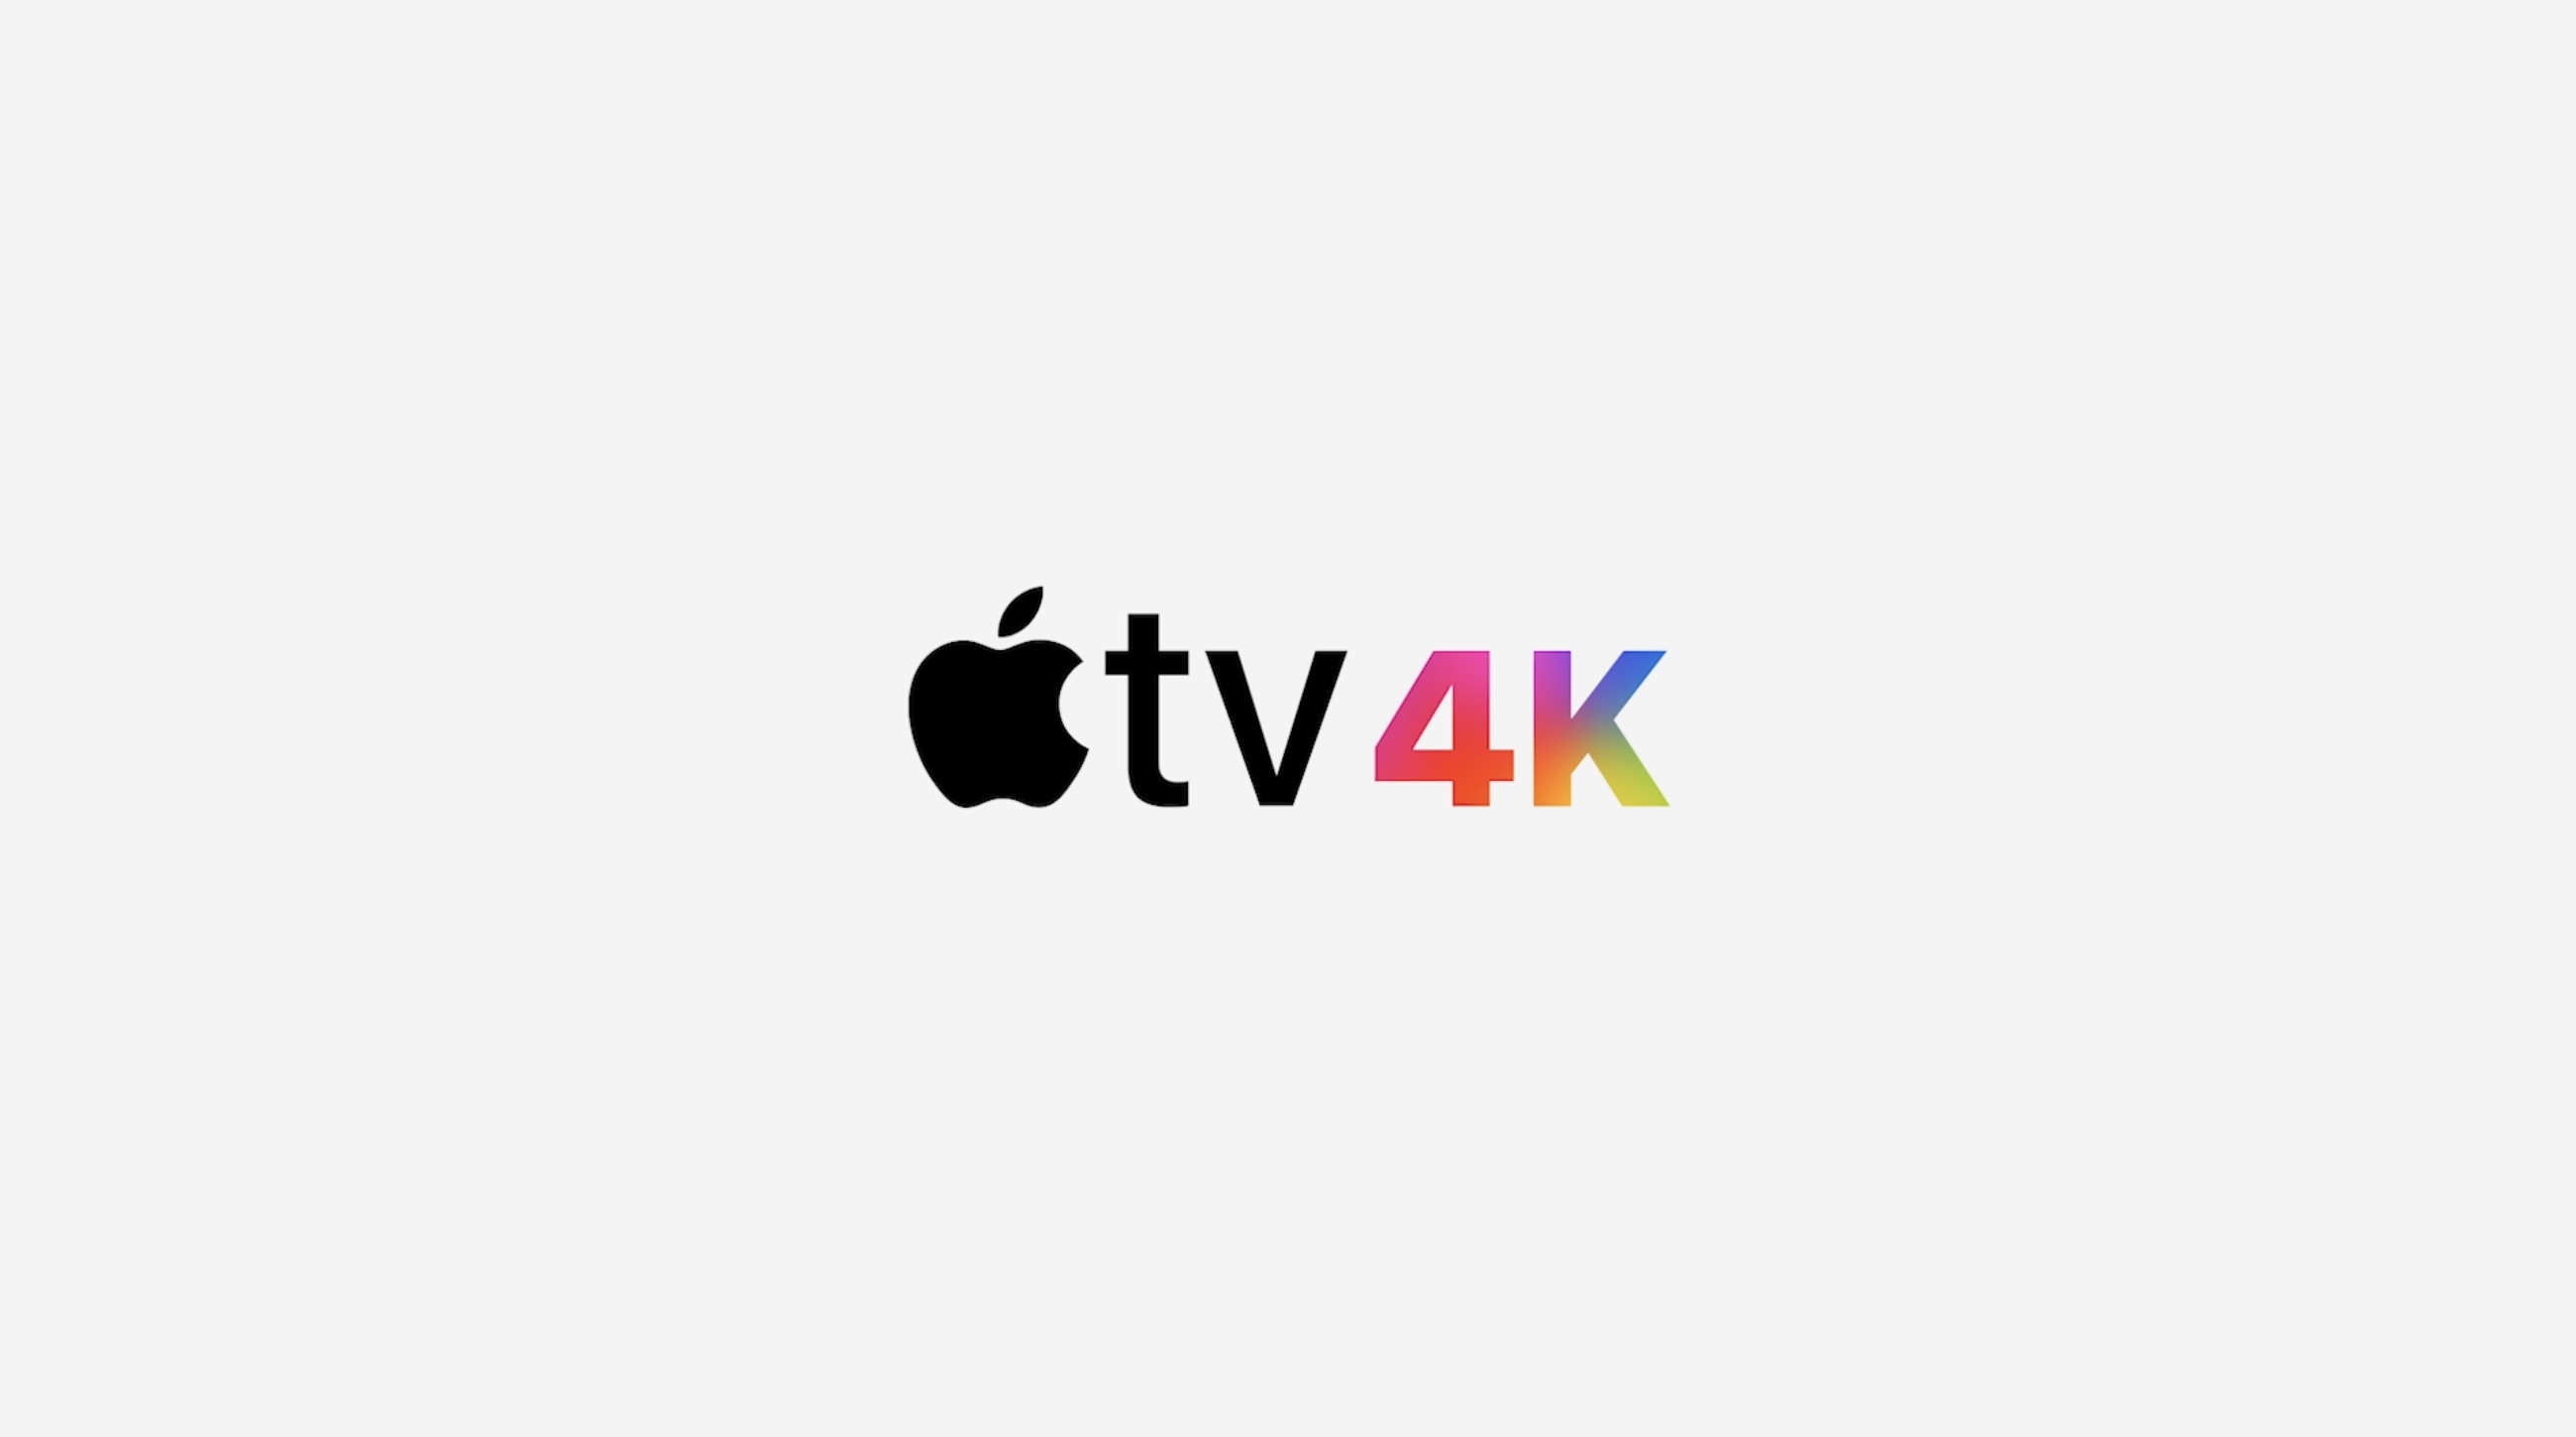 Just got a fresh TV4K 2021 but I'm having issues with all my HDMI cables.  Do you have any suggestions in cables? : r/appletv